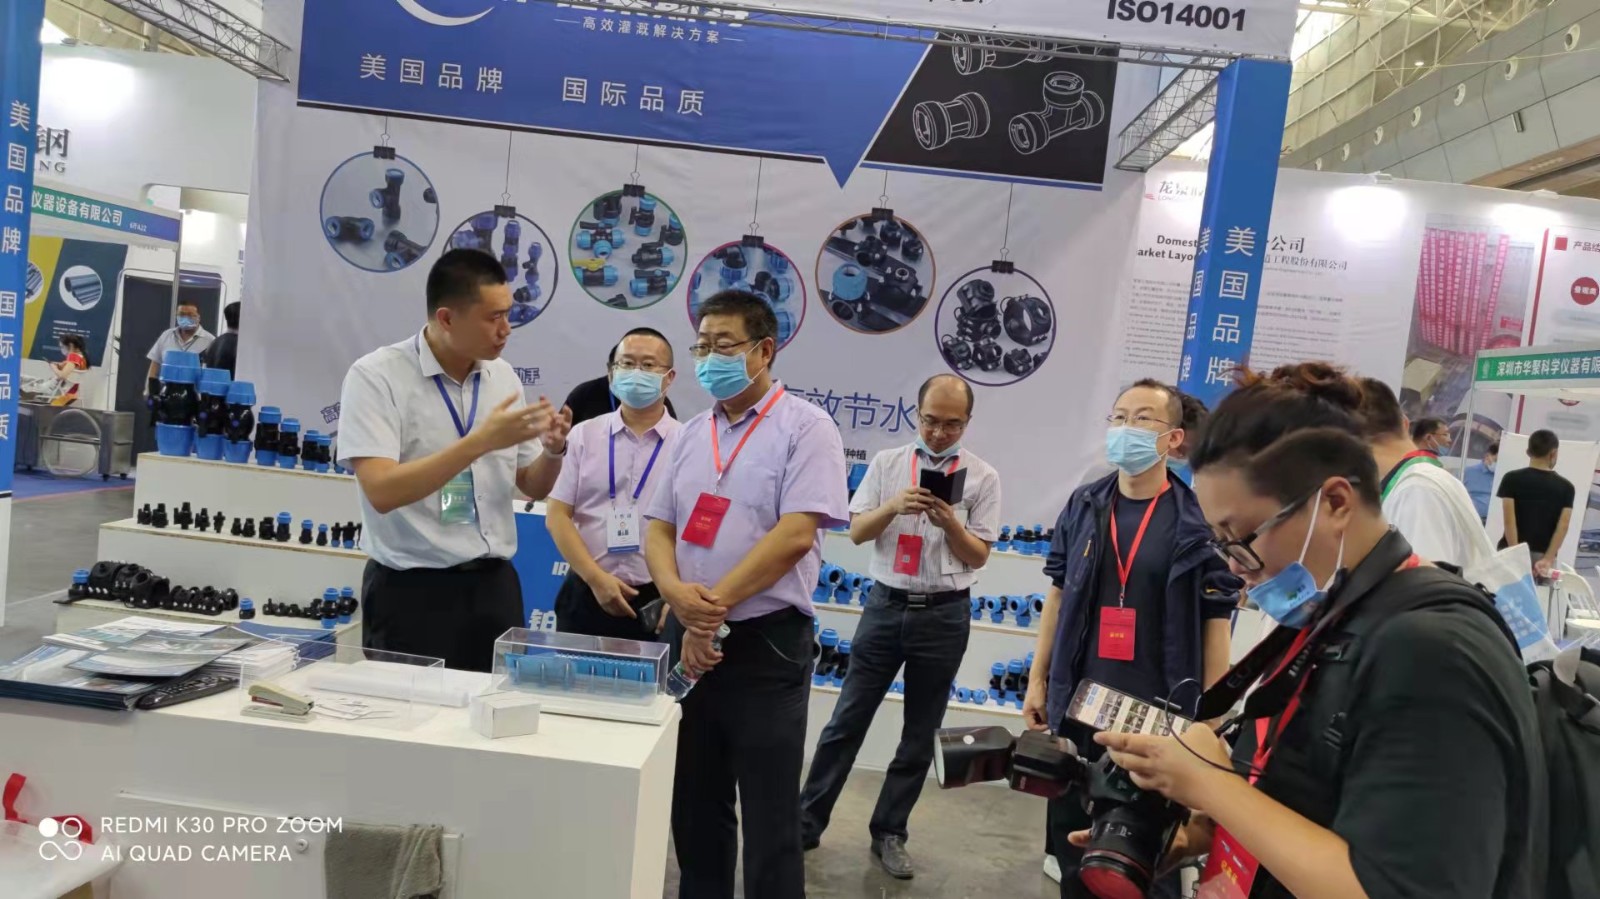 The First Xinjiang International Water Conservancy Technology Exposition Opened Grandly